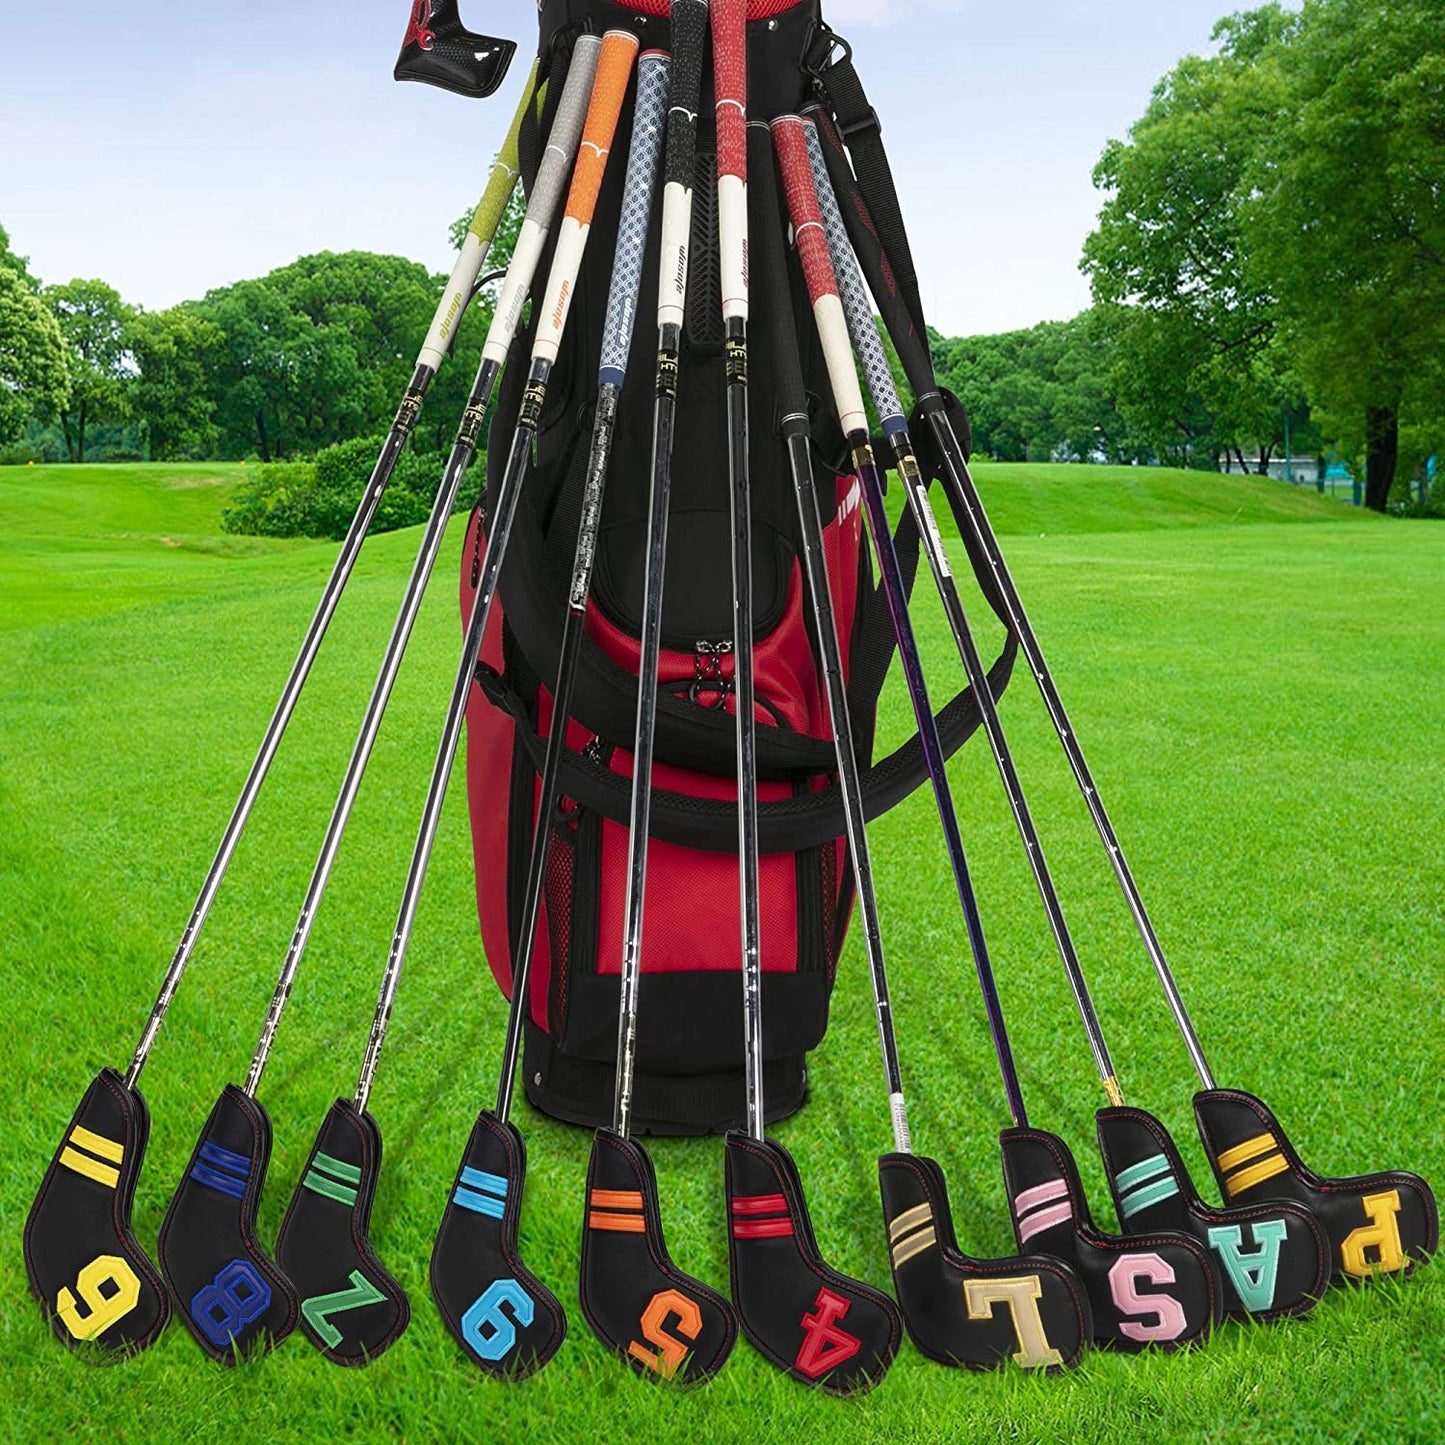 Zenesty Golf Iron Head Covers Set for Right Handed Black Color PU Leather 11pcs/lot (Including 4 5 6 7 8 9 Pw Aw Sw Lw X) Number Embroideried Moderately Thick Waterproof Fit Most Brands